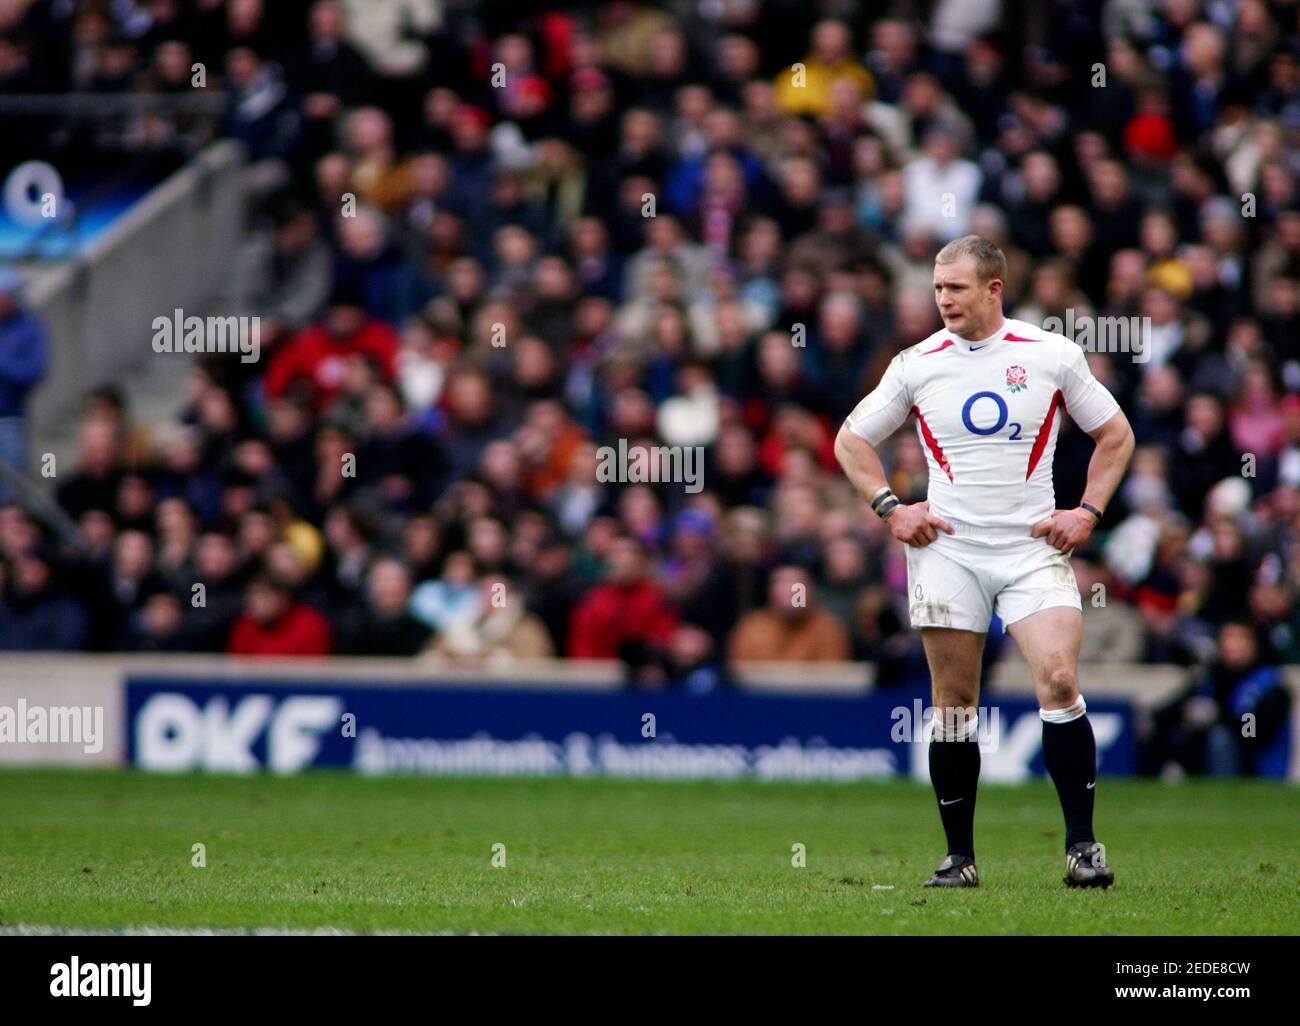 Rugby Union - Angleterre / France RBS six Nations Championship 2005 - Twickenham, Londres - 13/2/05 PKF ad-board crédit obligatoire: Action Images / Andrew Couldridge Livepic Banque D'Images